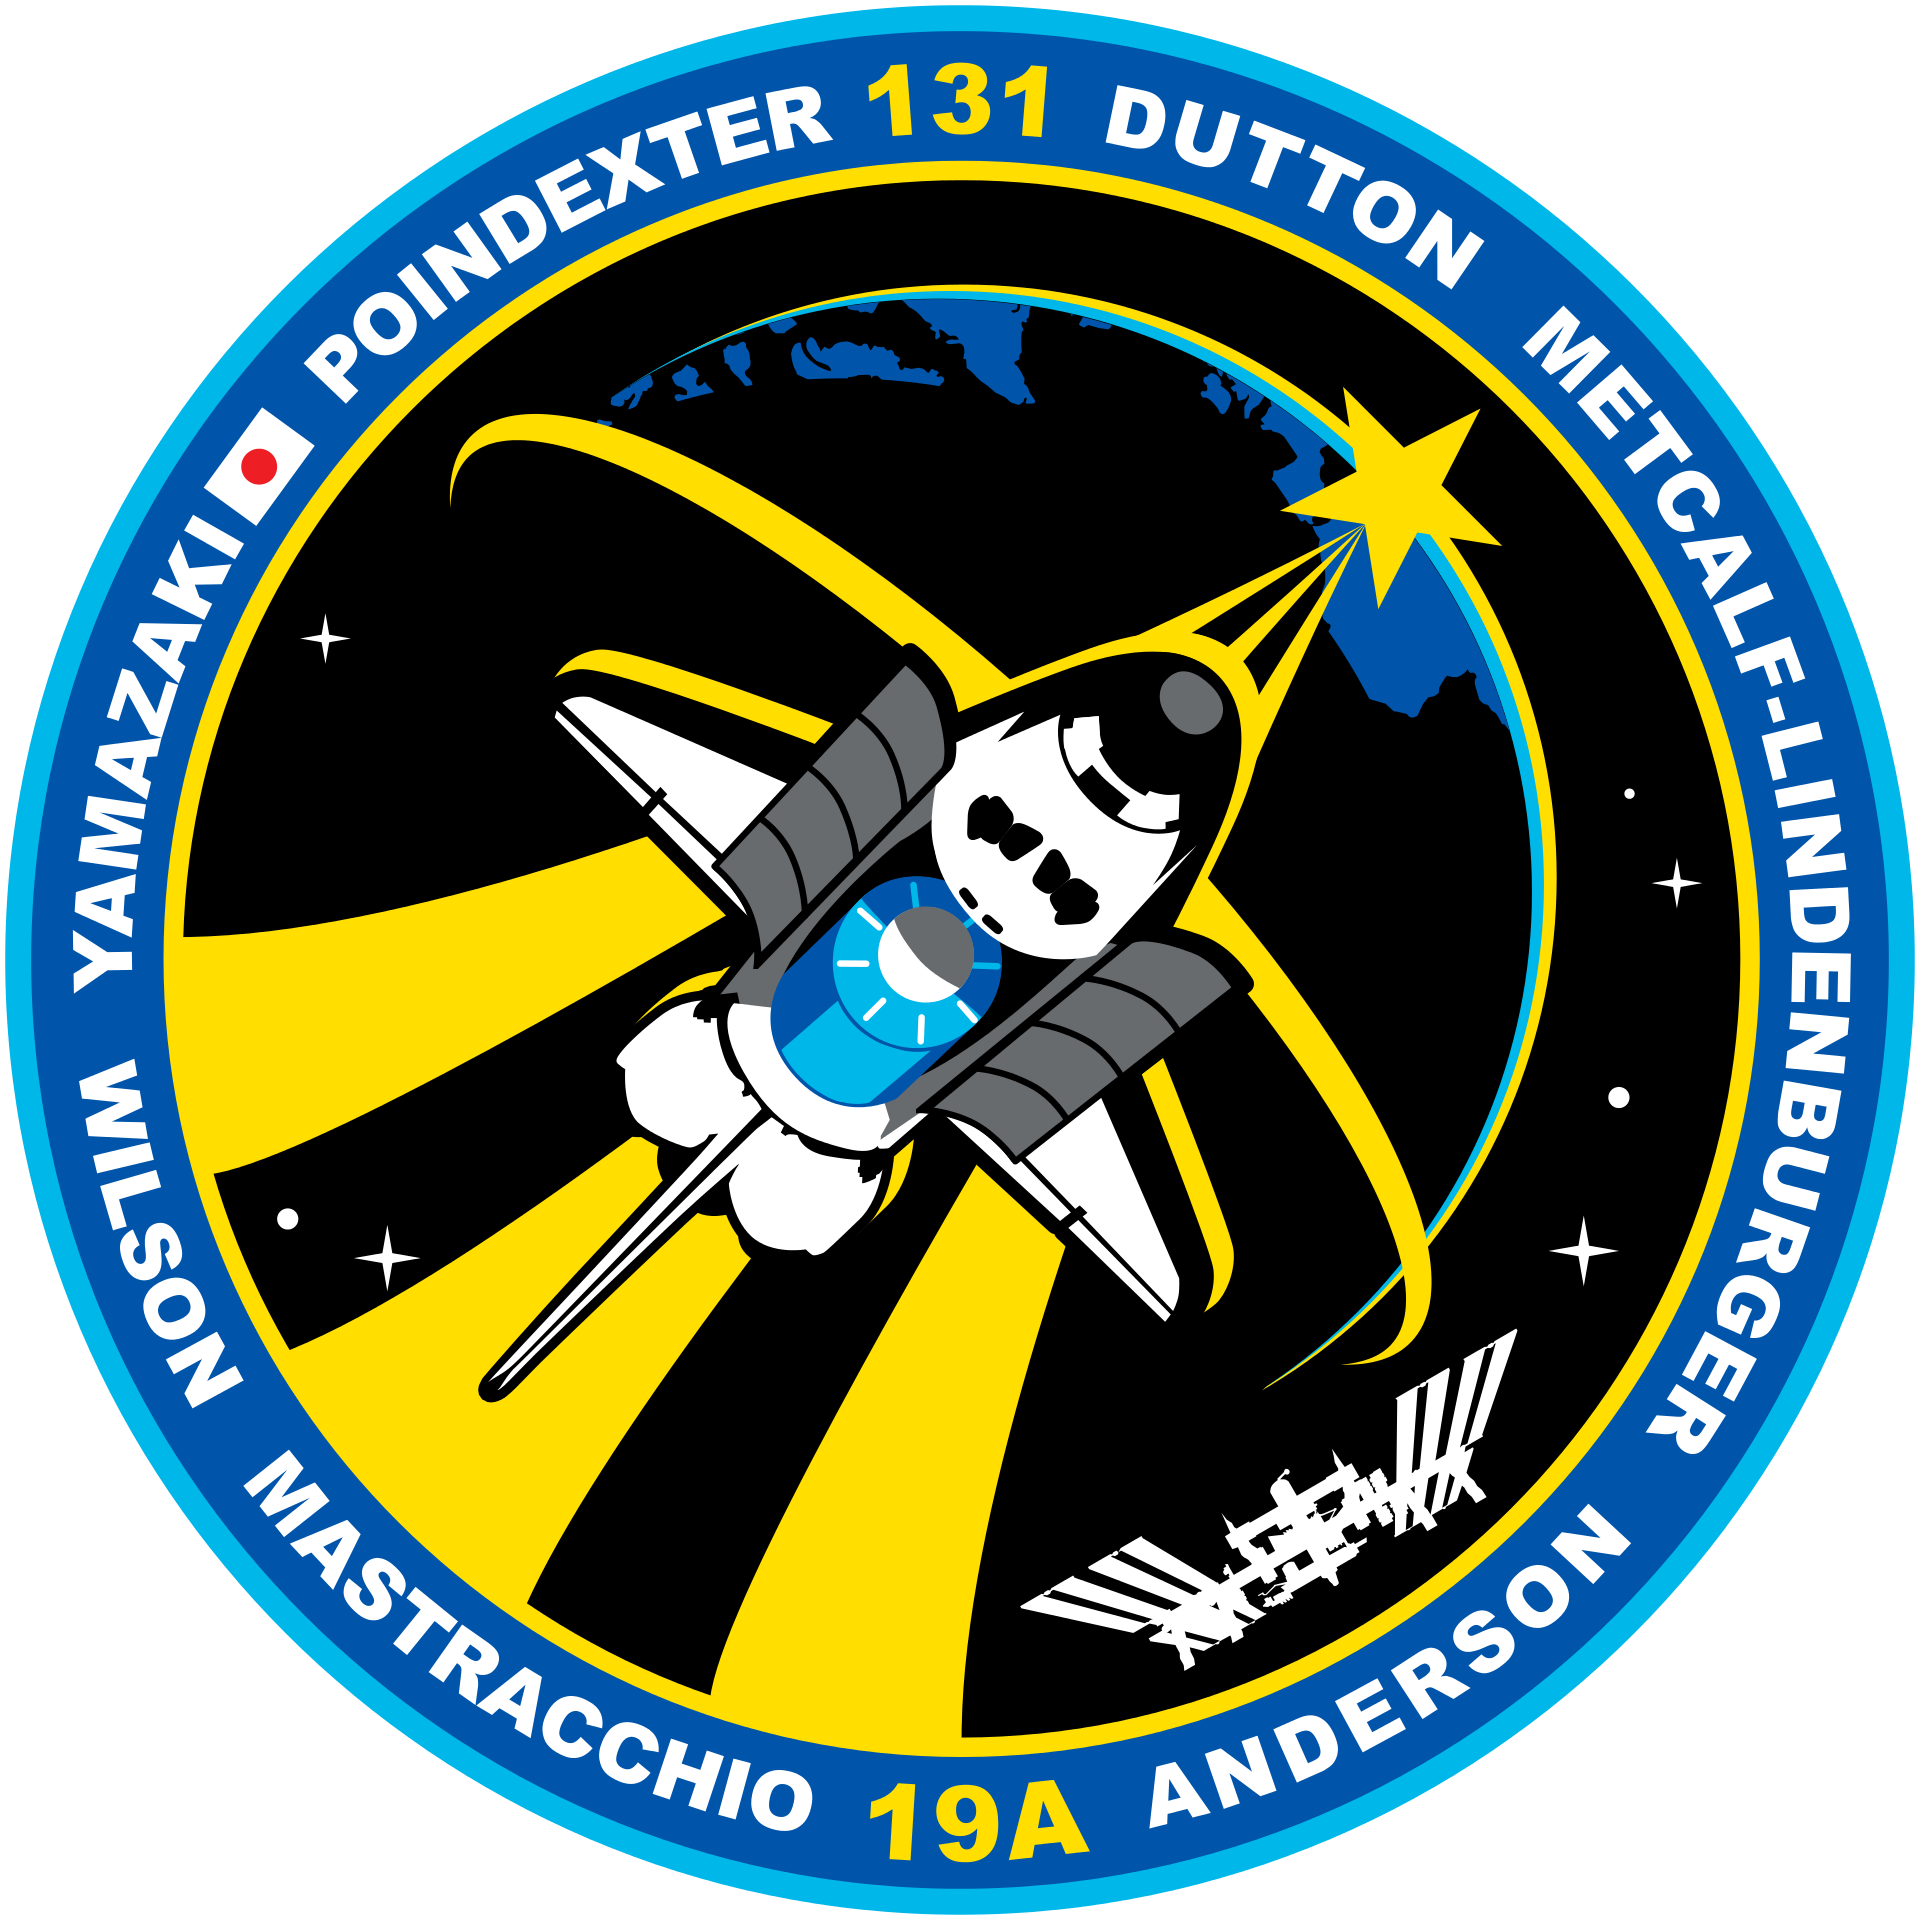 Mission patch for STS-131